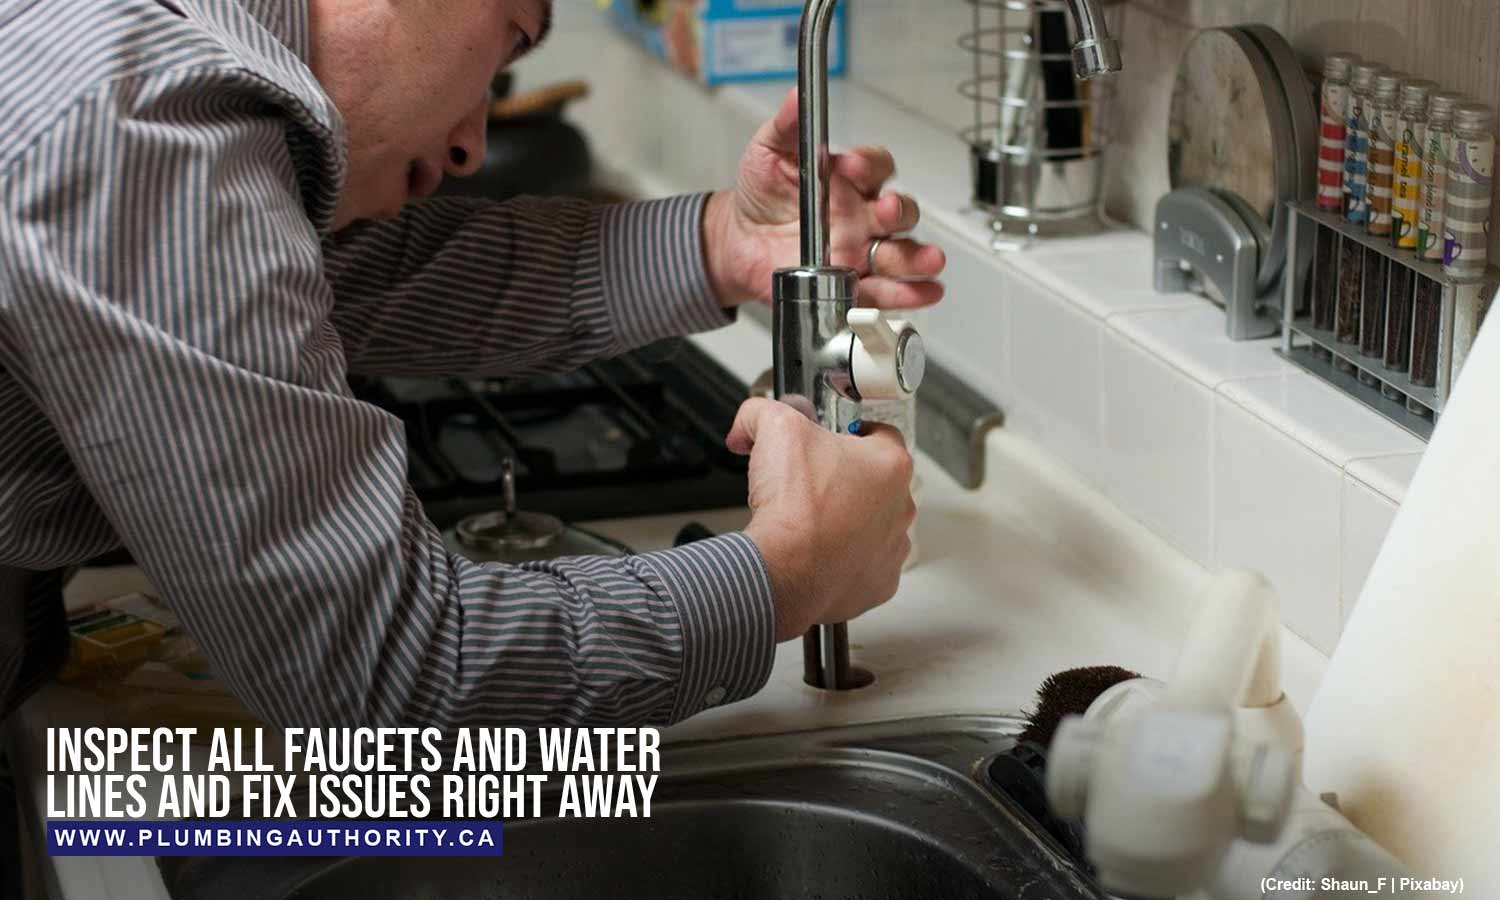 Inspect all faucets and water lines